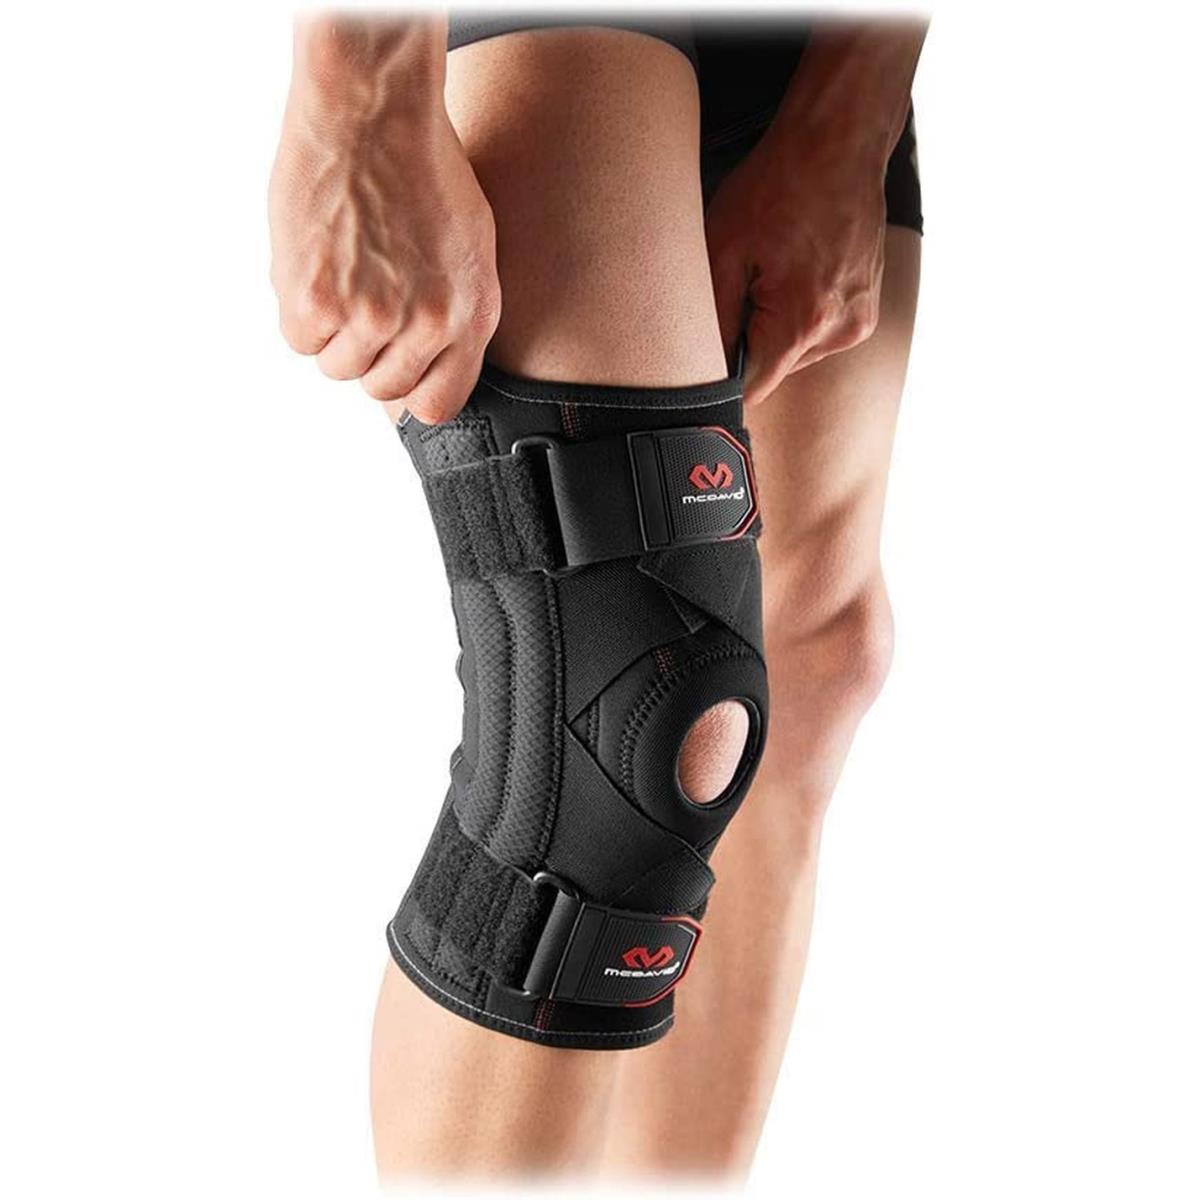 Mcdavid Knee Brace Support with Side Stays Compression. Knee Sleeve Cross Stra